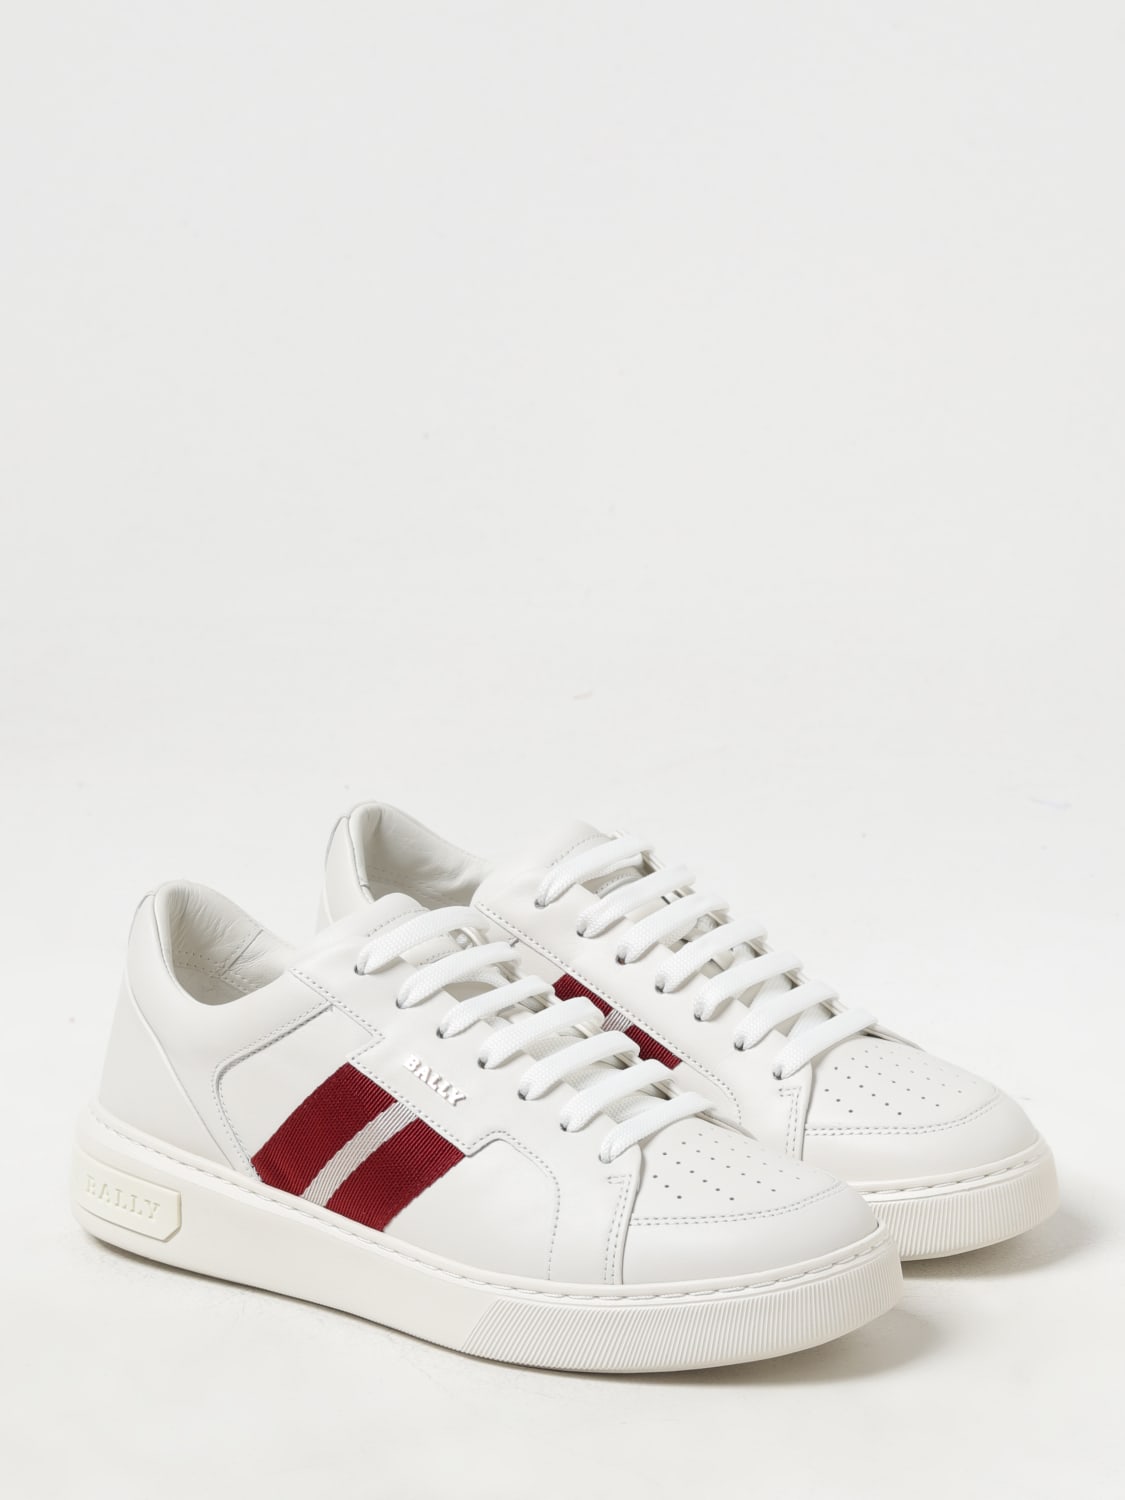 BALLY: Sneakers men - White | BALLY sneakers 60079925268 online at ...